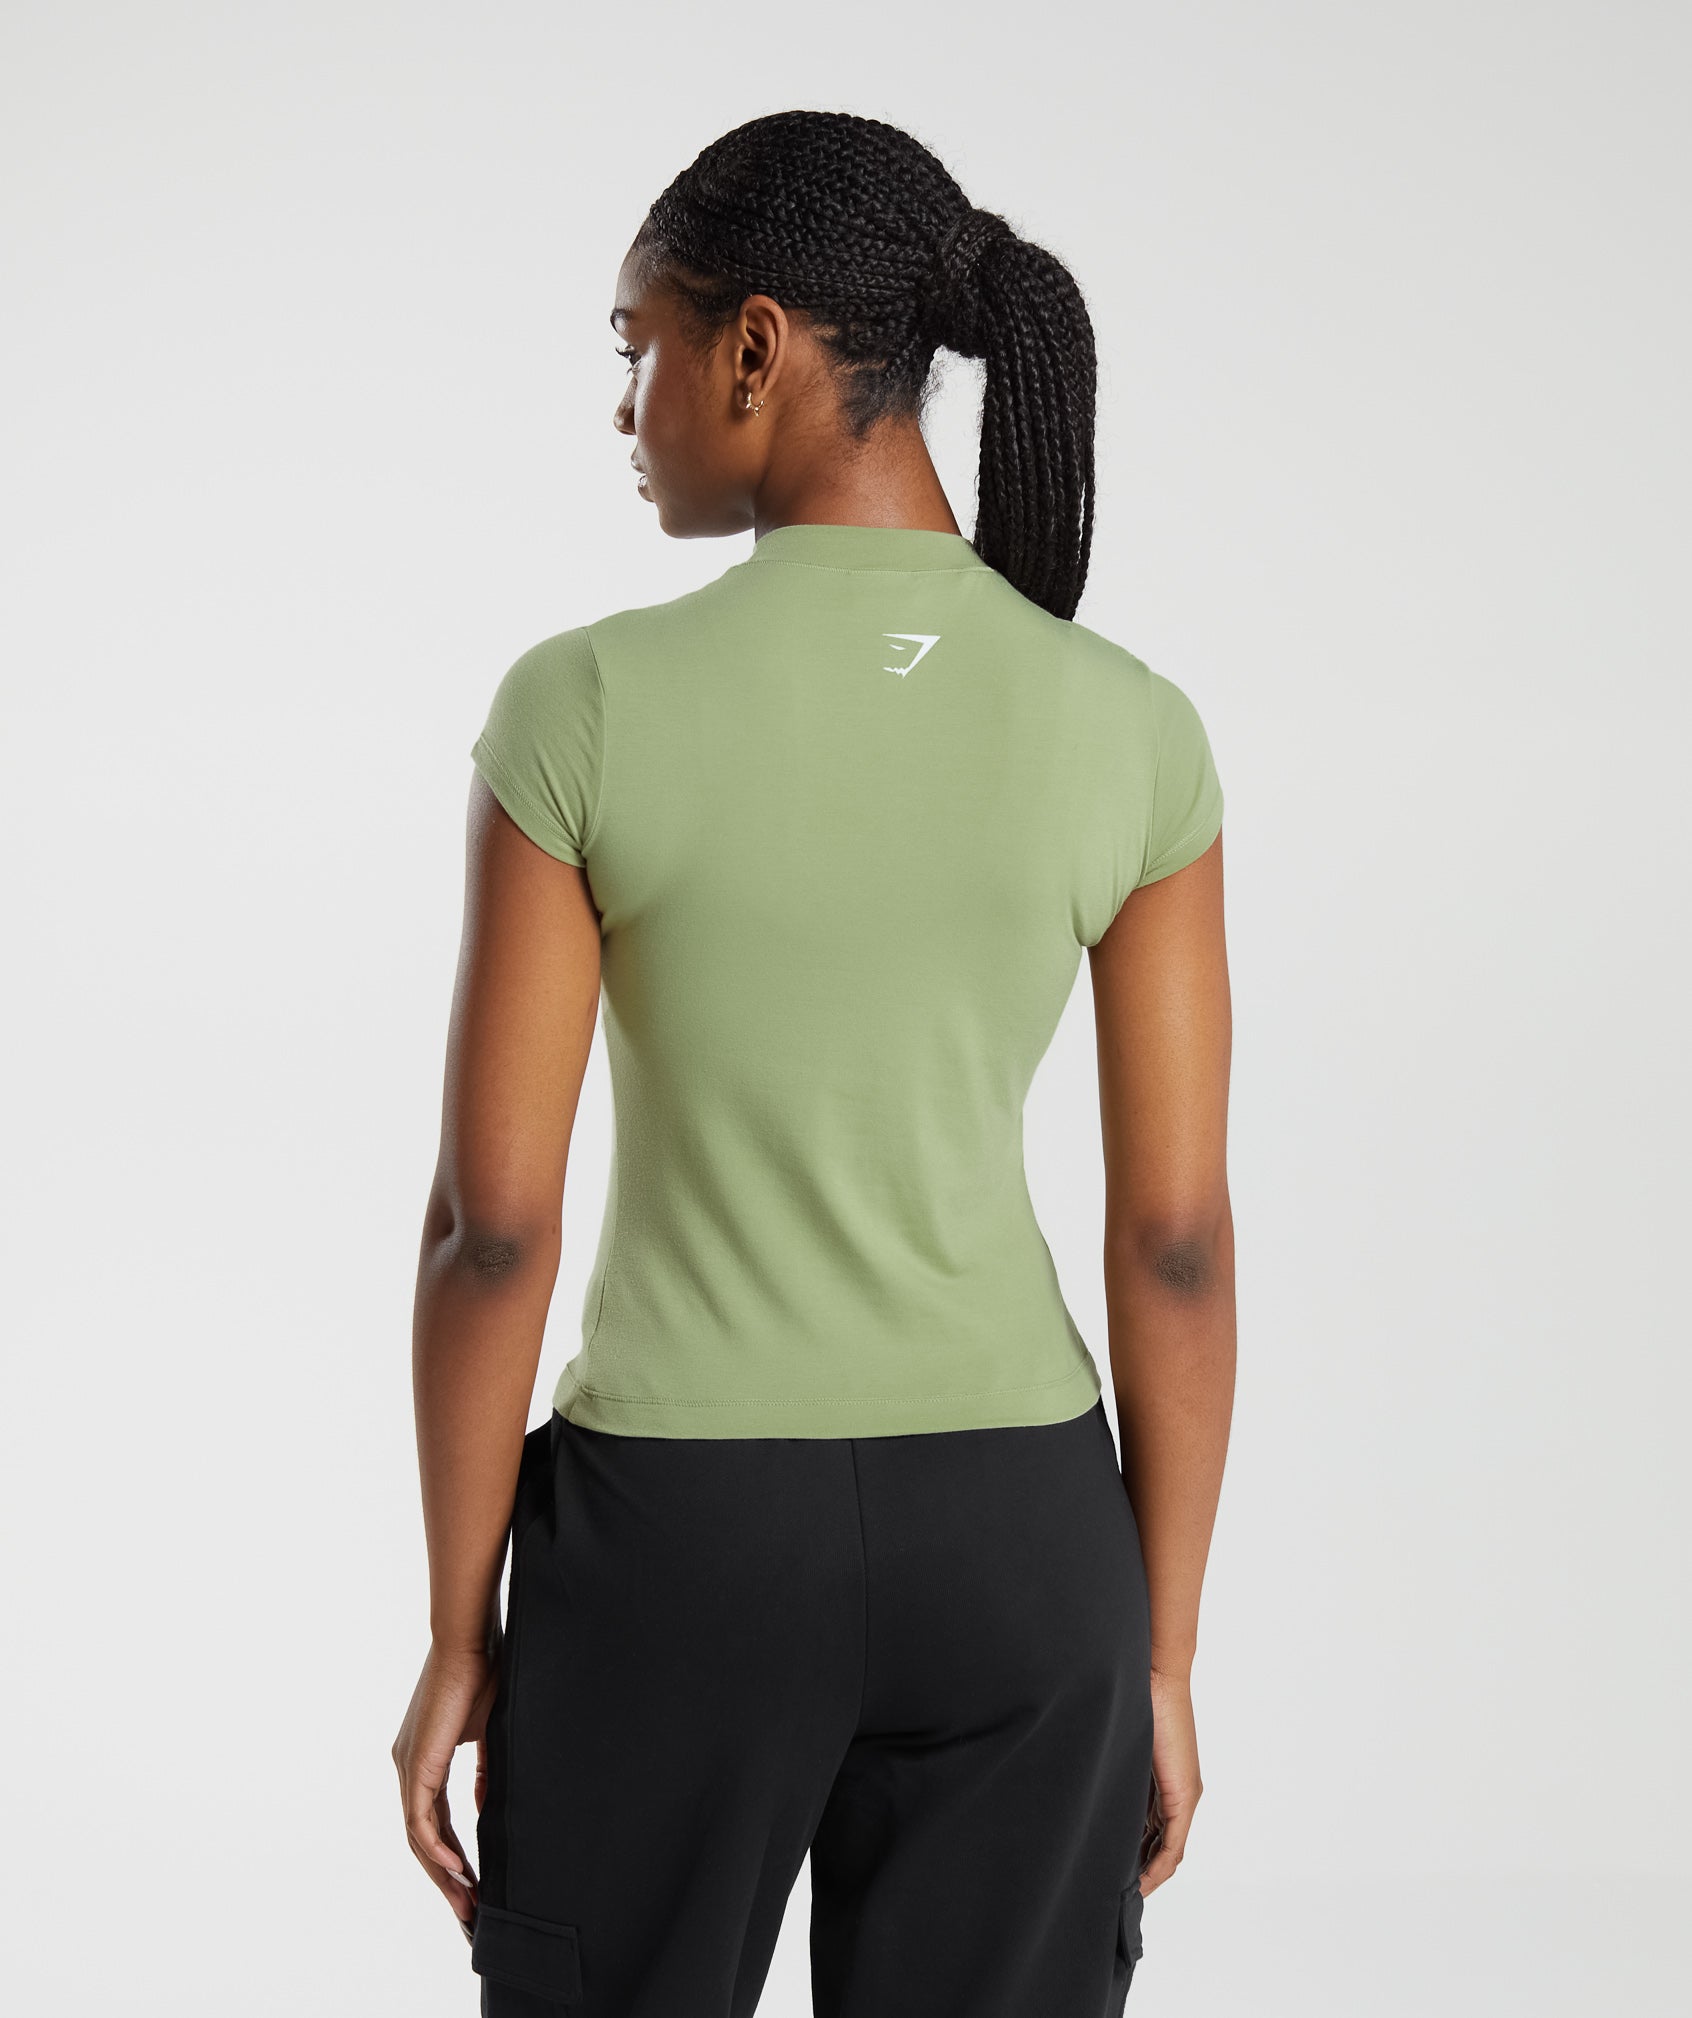 Phys Ed Graphic Body Fit T-Shirt in Light Sage Green - view 4